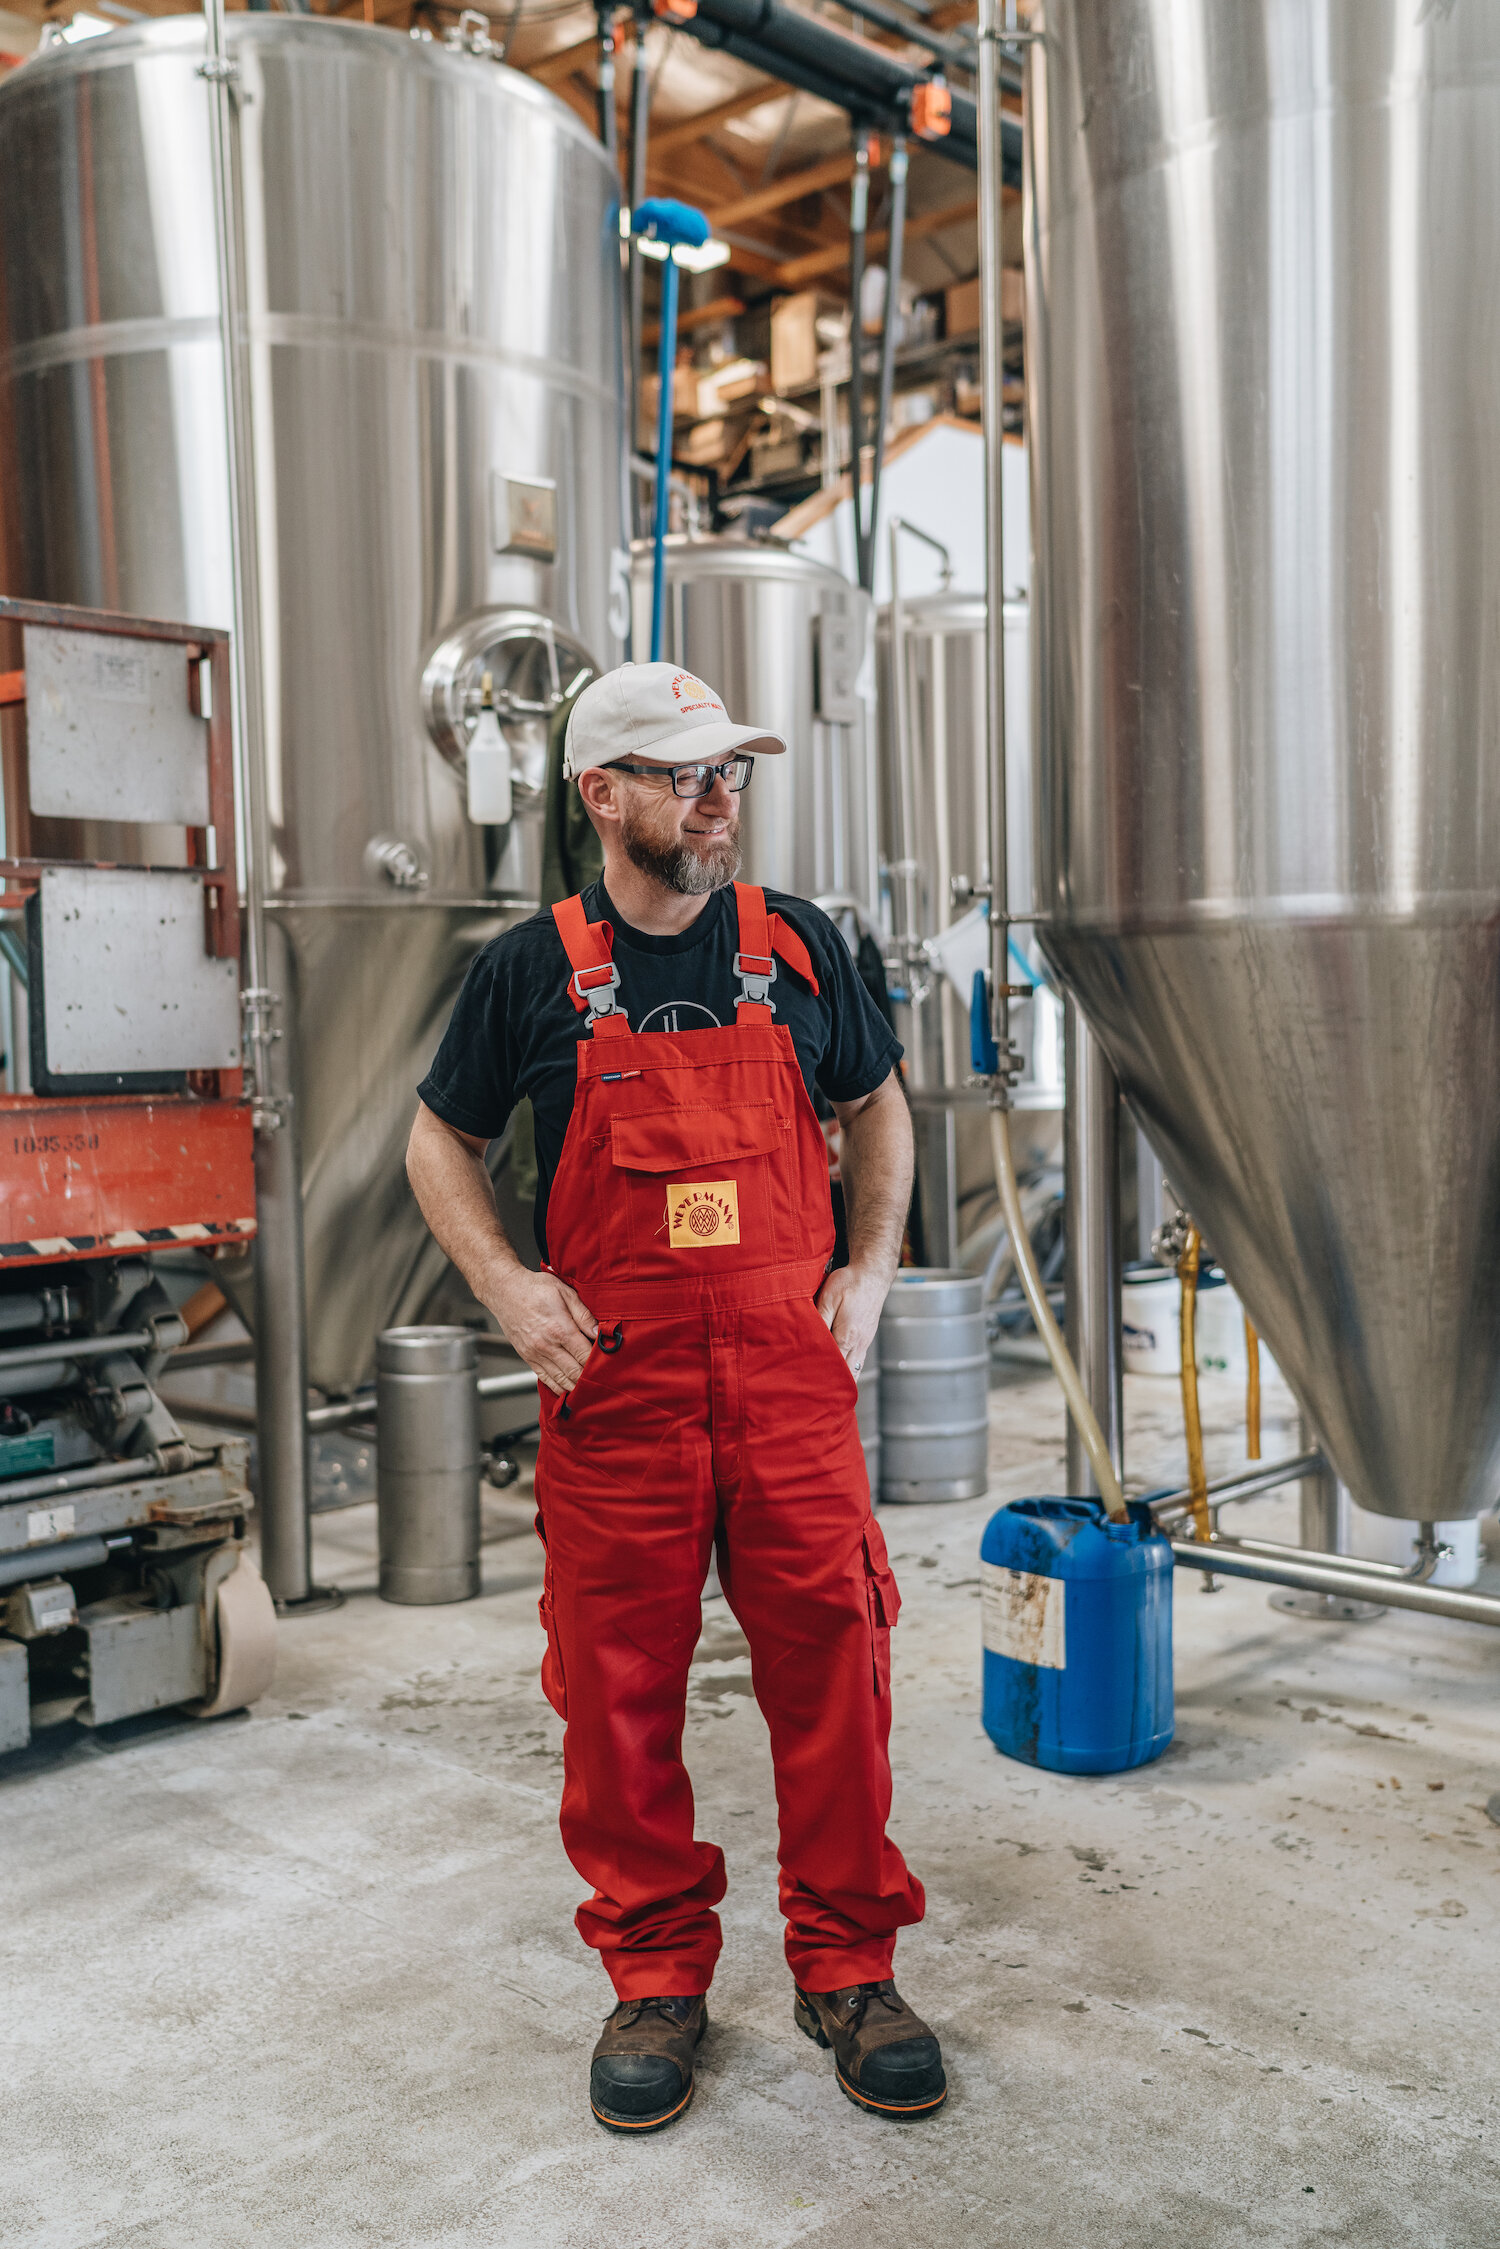  Owner Brian Schmitz sporting bright red overalls for a day of brewing fresh batches of Lucky Luke beer 